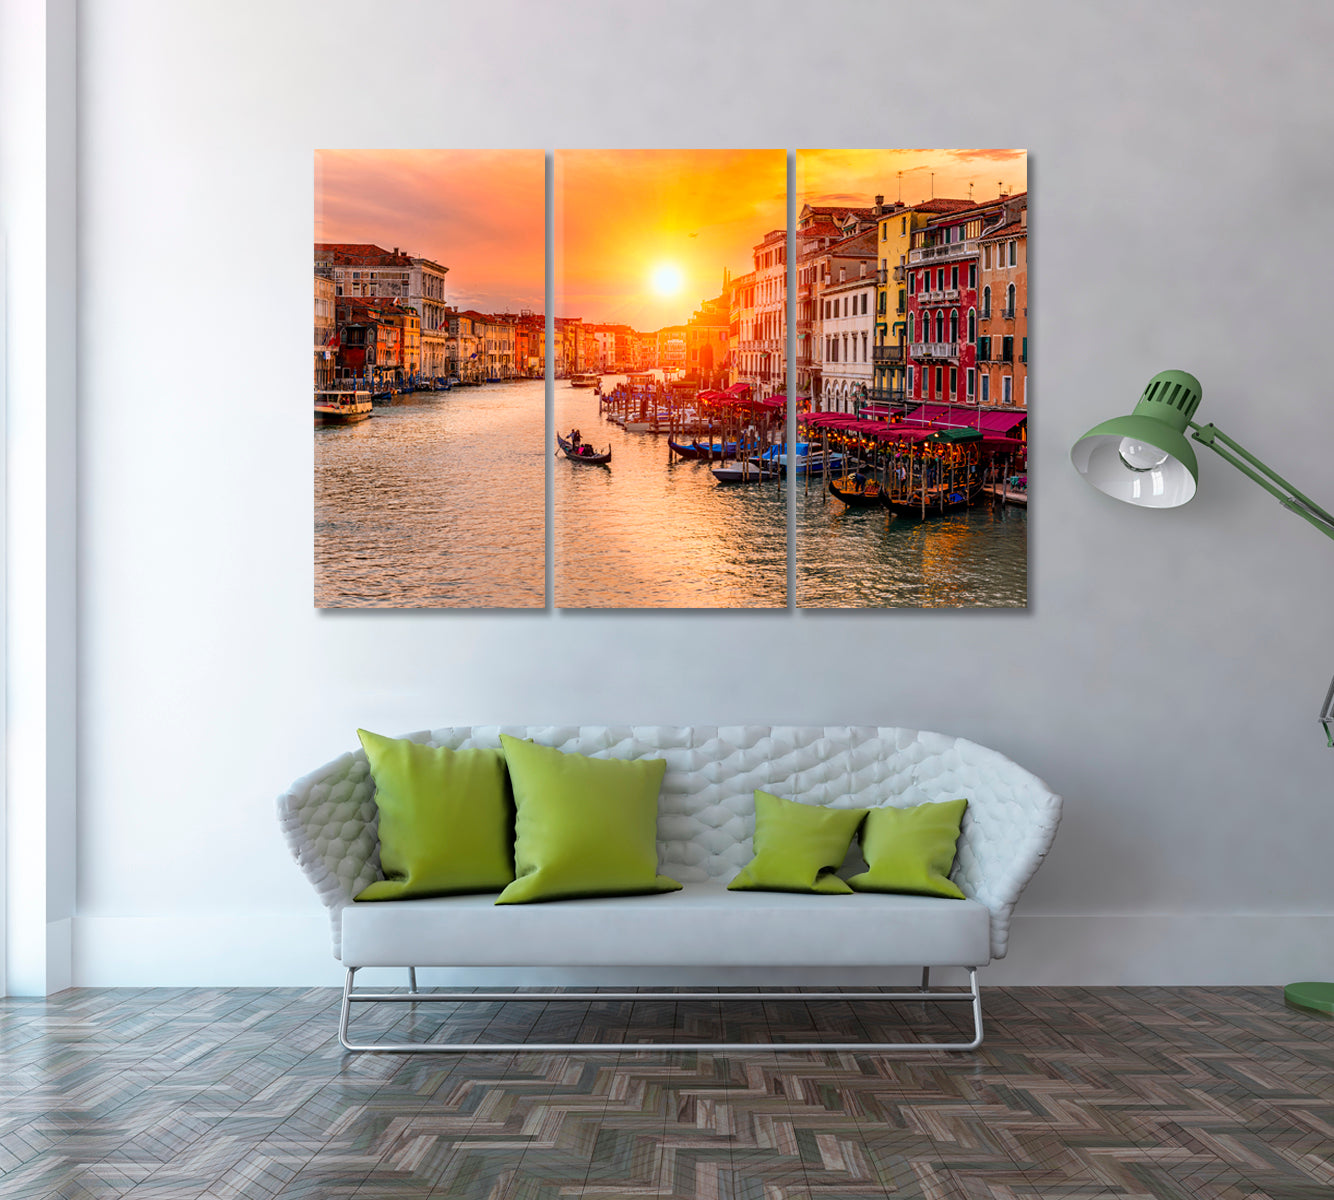 Sunset over Grand Canal Venice Canvas Print ArtLexy 3 Panels 36"x24" inches 